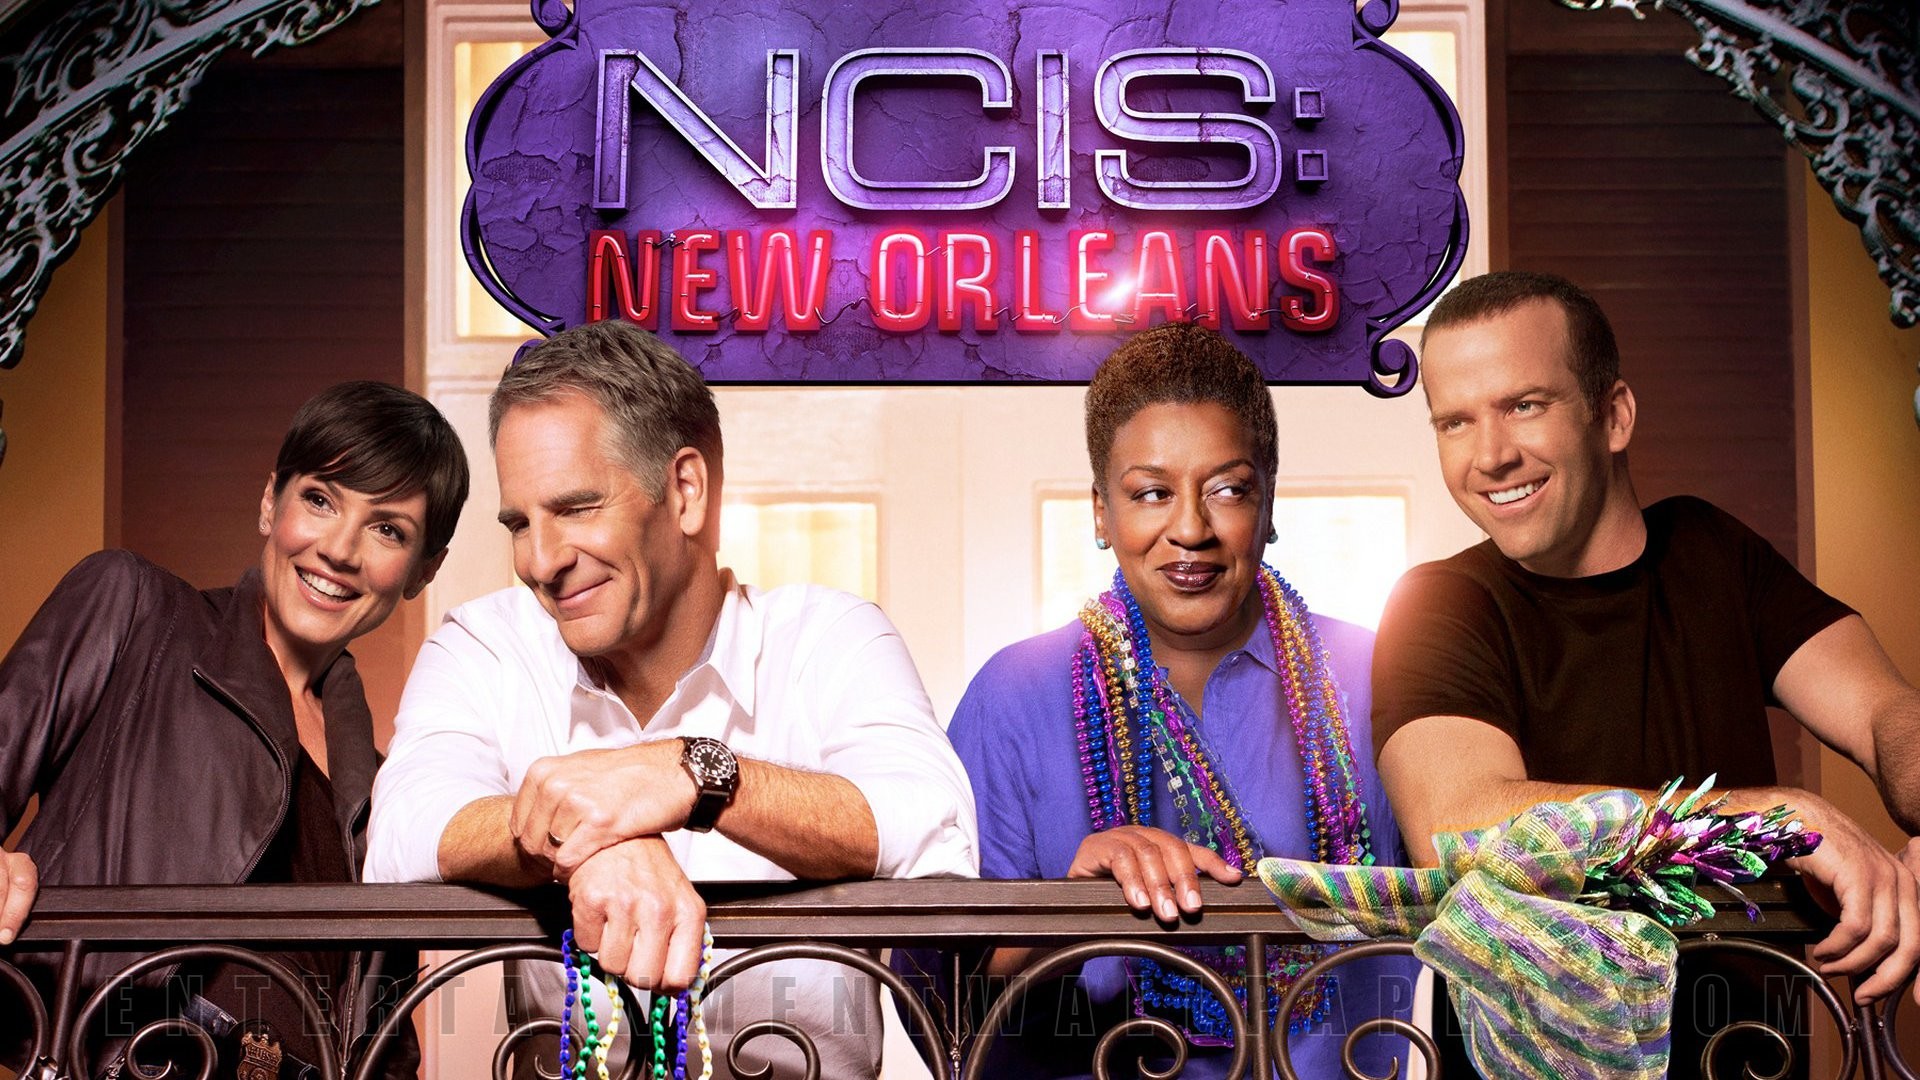 1920x1080 ... wallpaper and background; ncis new orleans wallpapers high quality  download free ...